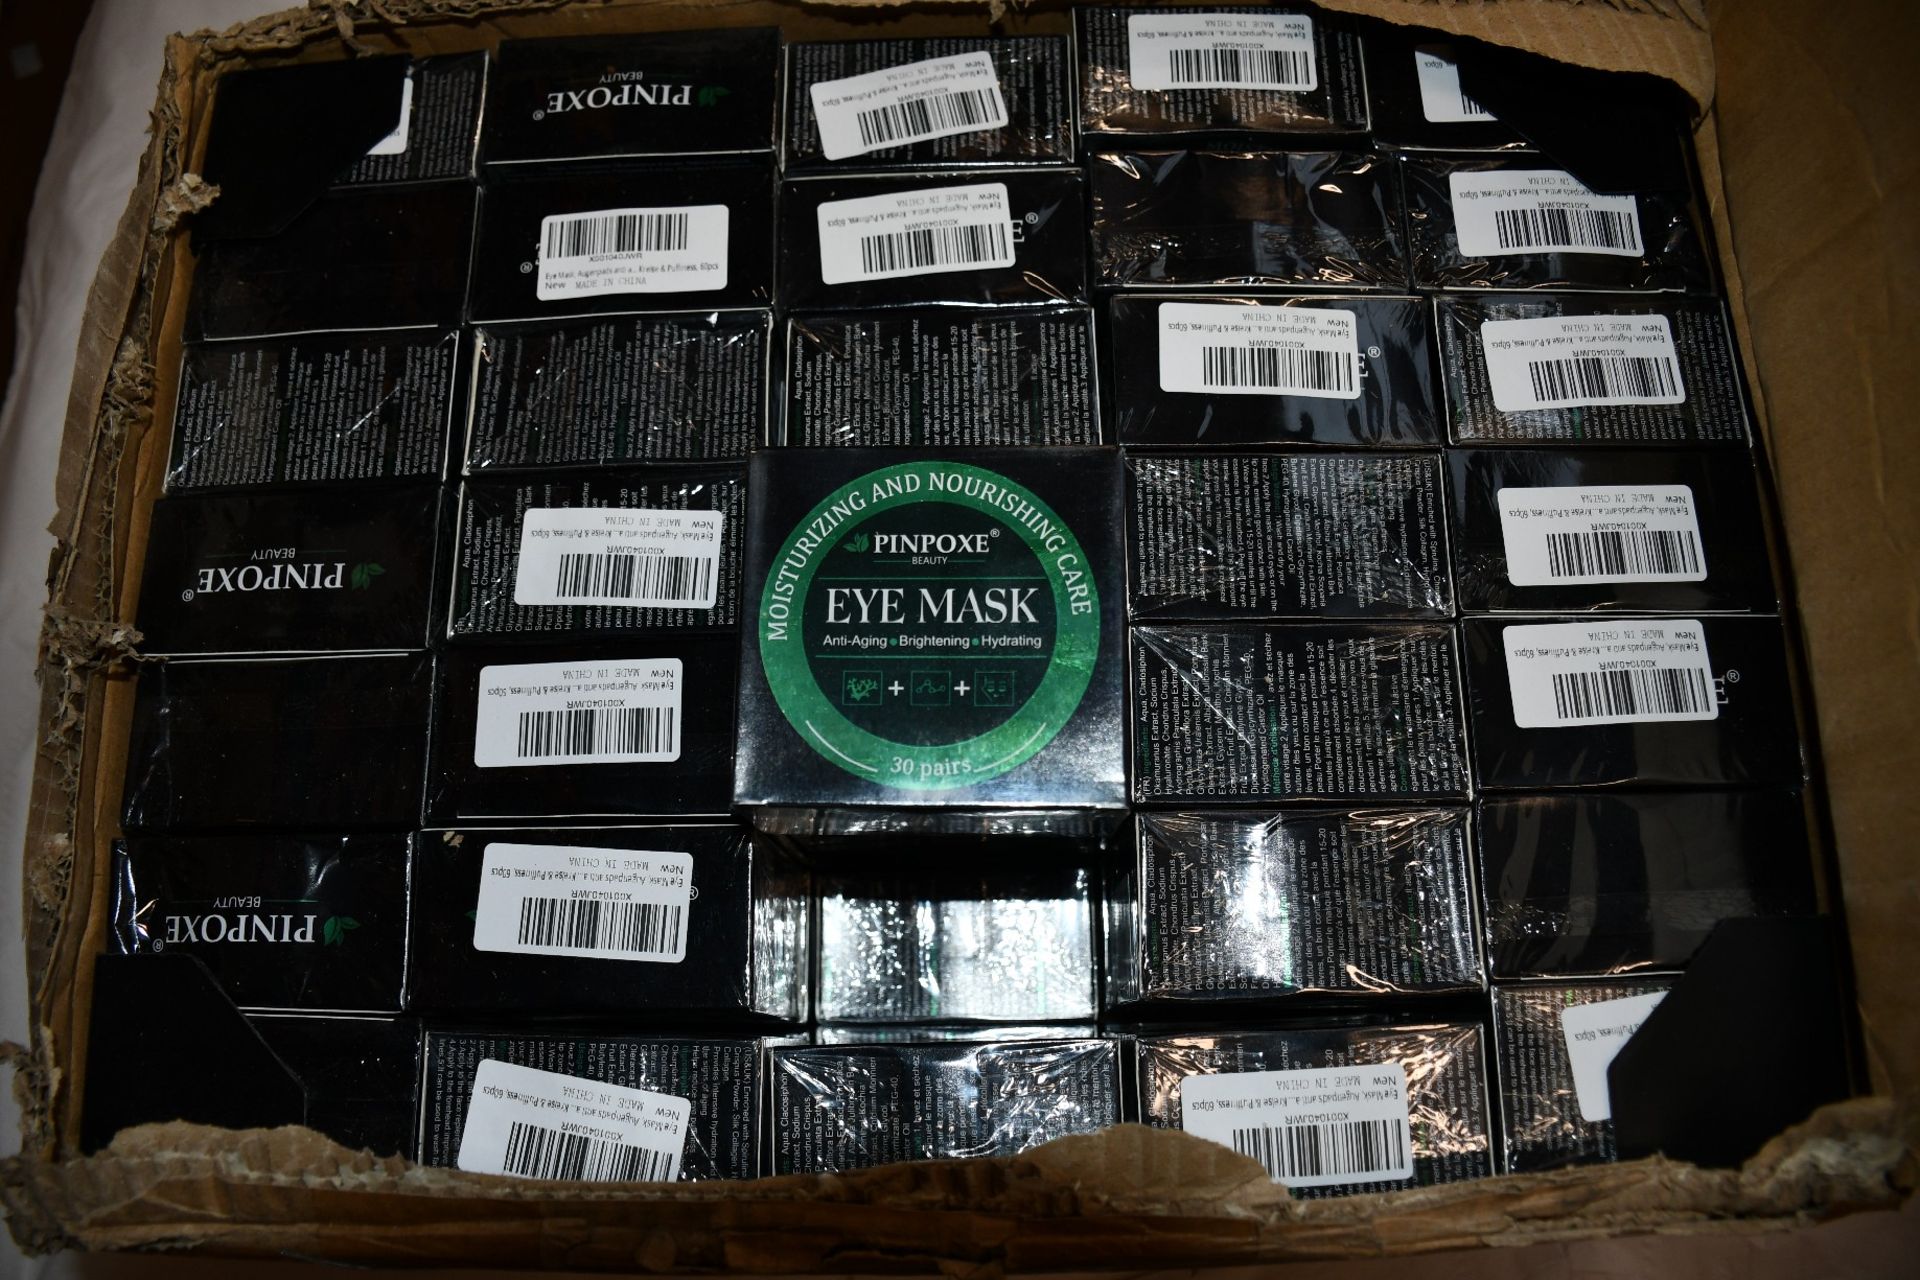 A box of Pinpoxe beauty eye masks anti-ageing, brightening, hydrating (30 pairs per item) (